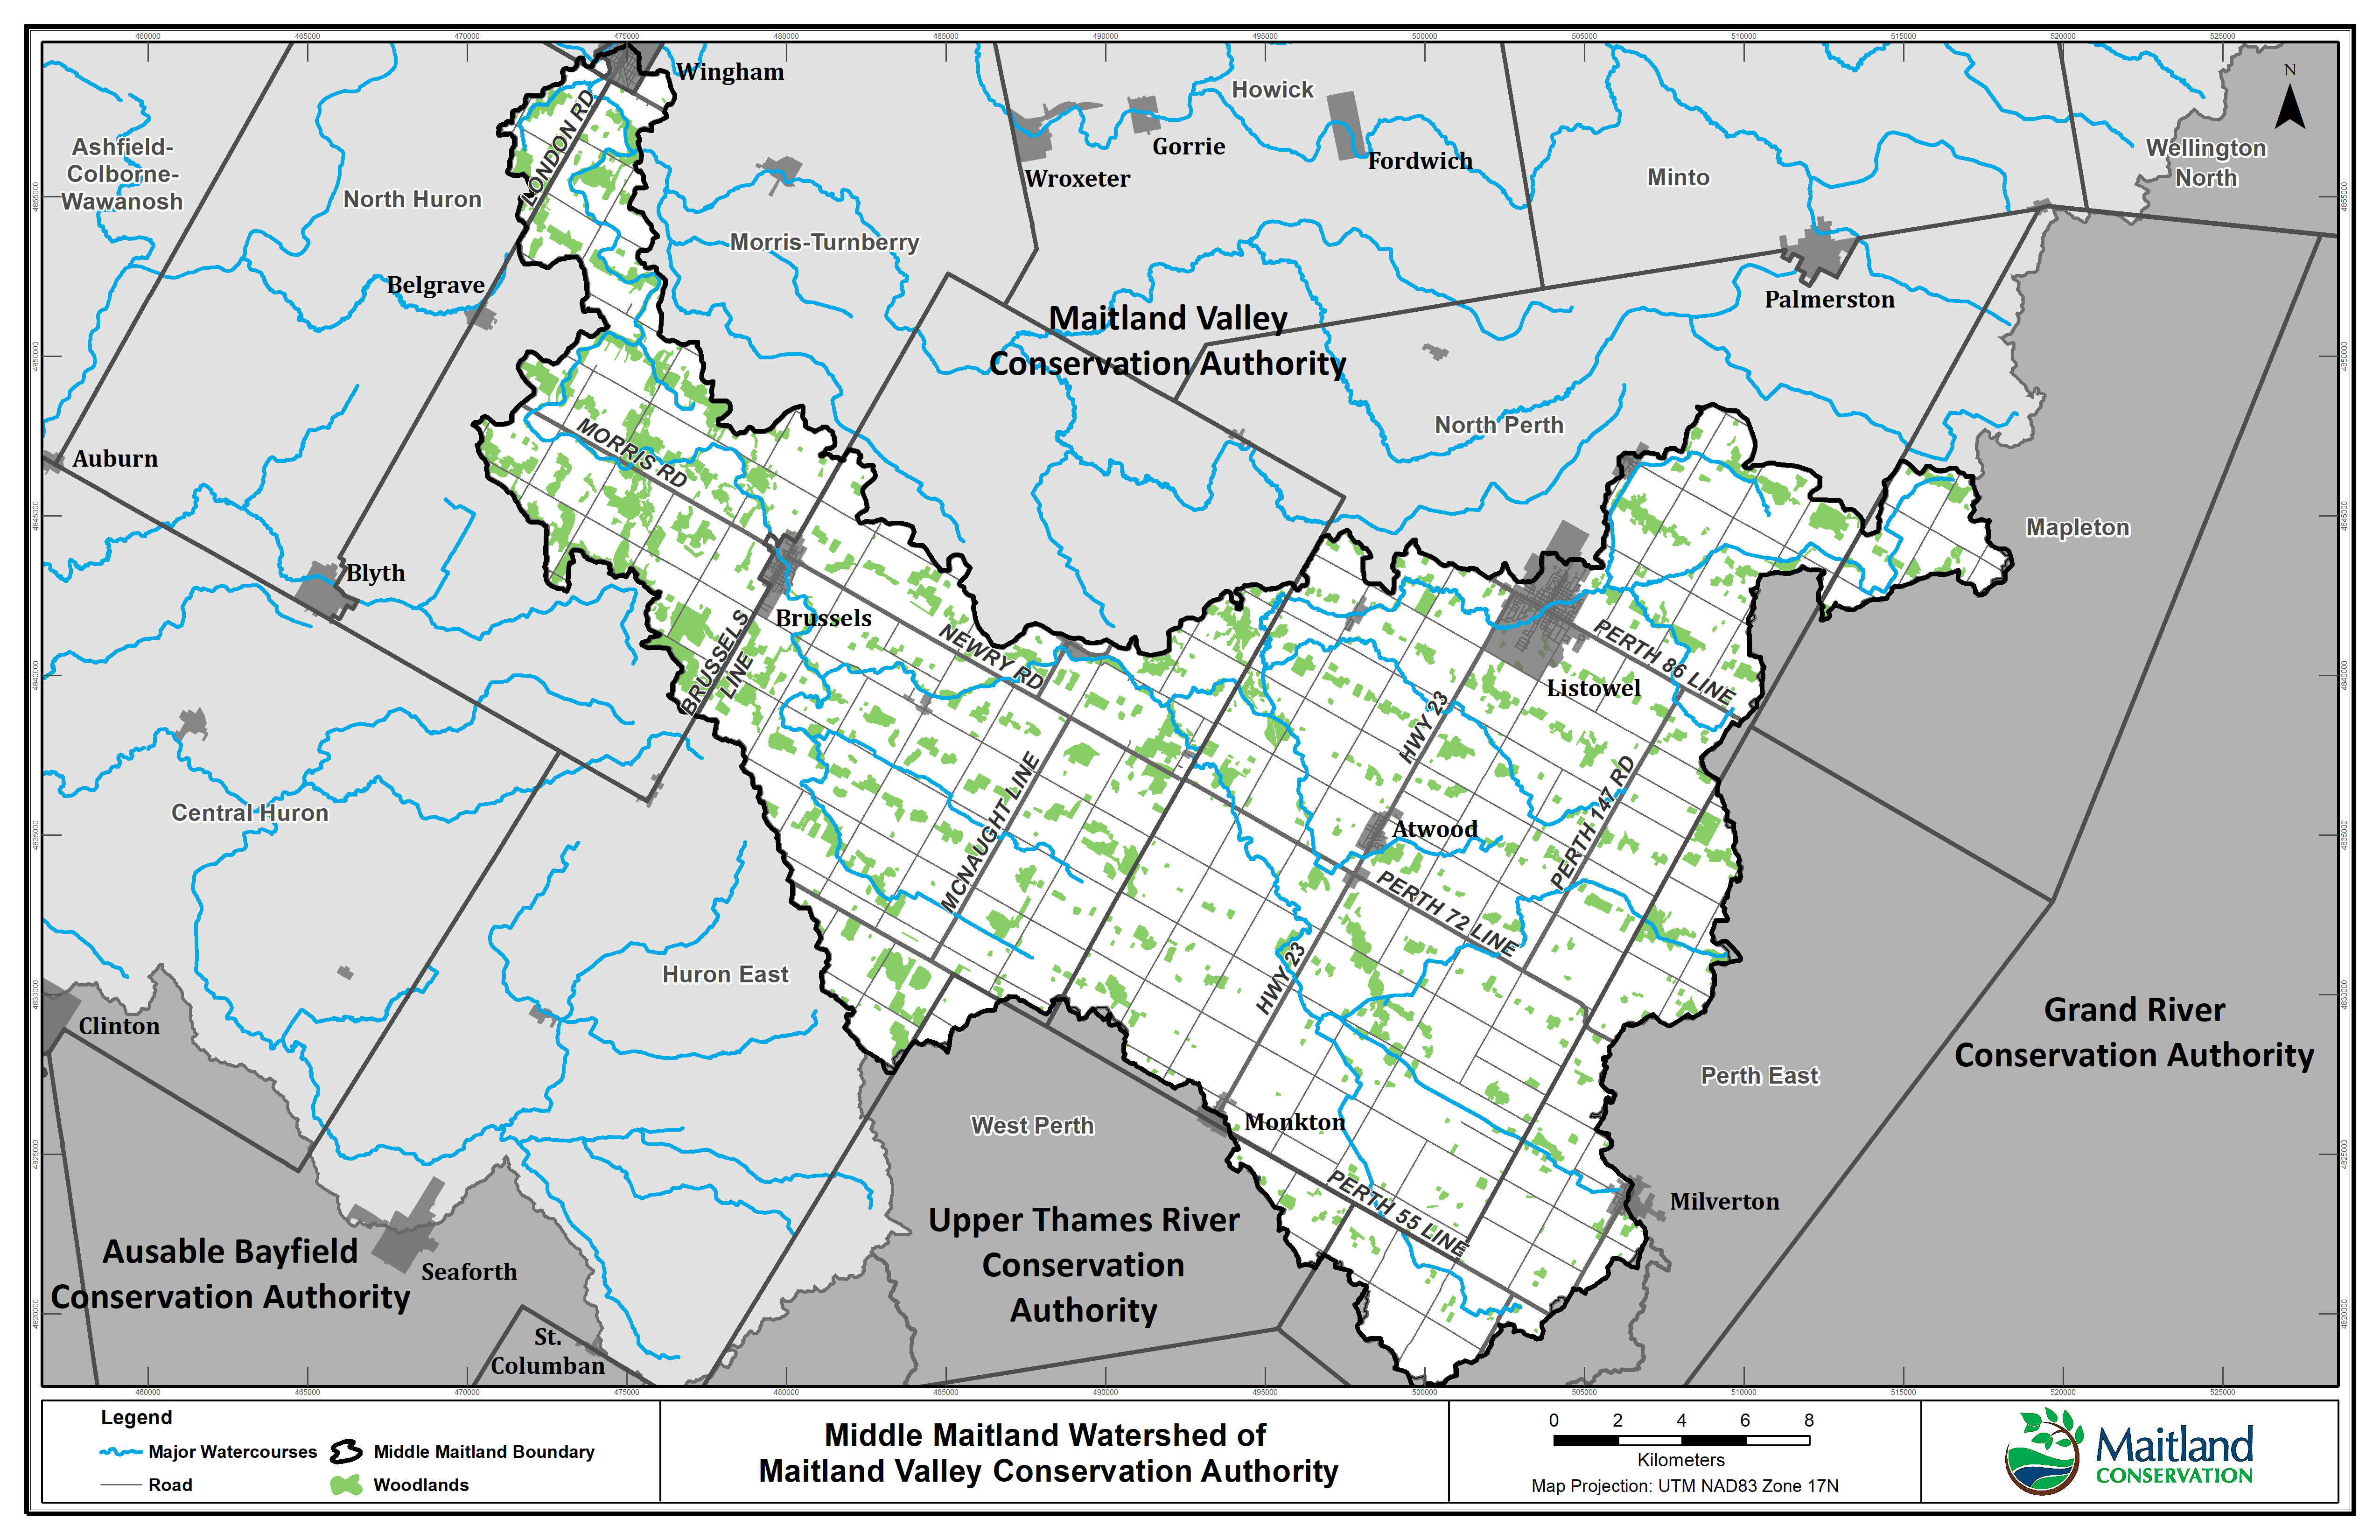 A map of the Maitland Valley Conservation Authority Sub Watersheds